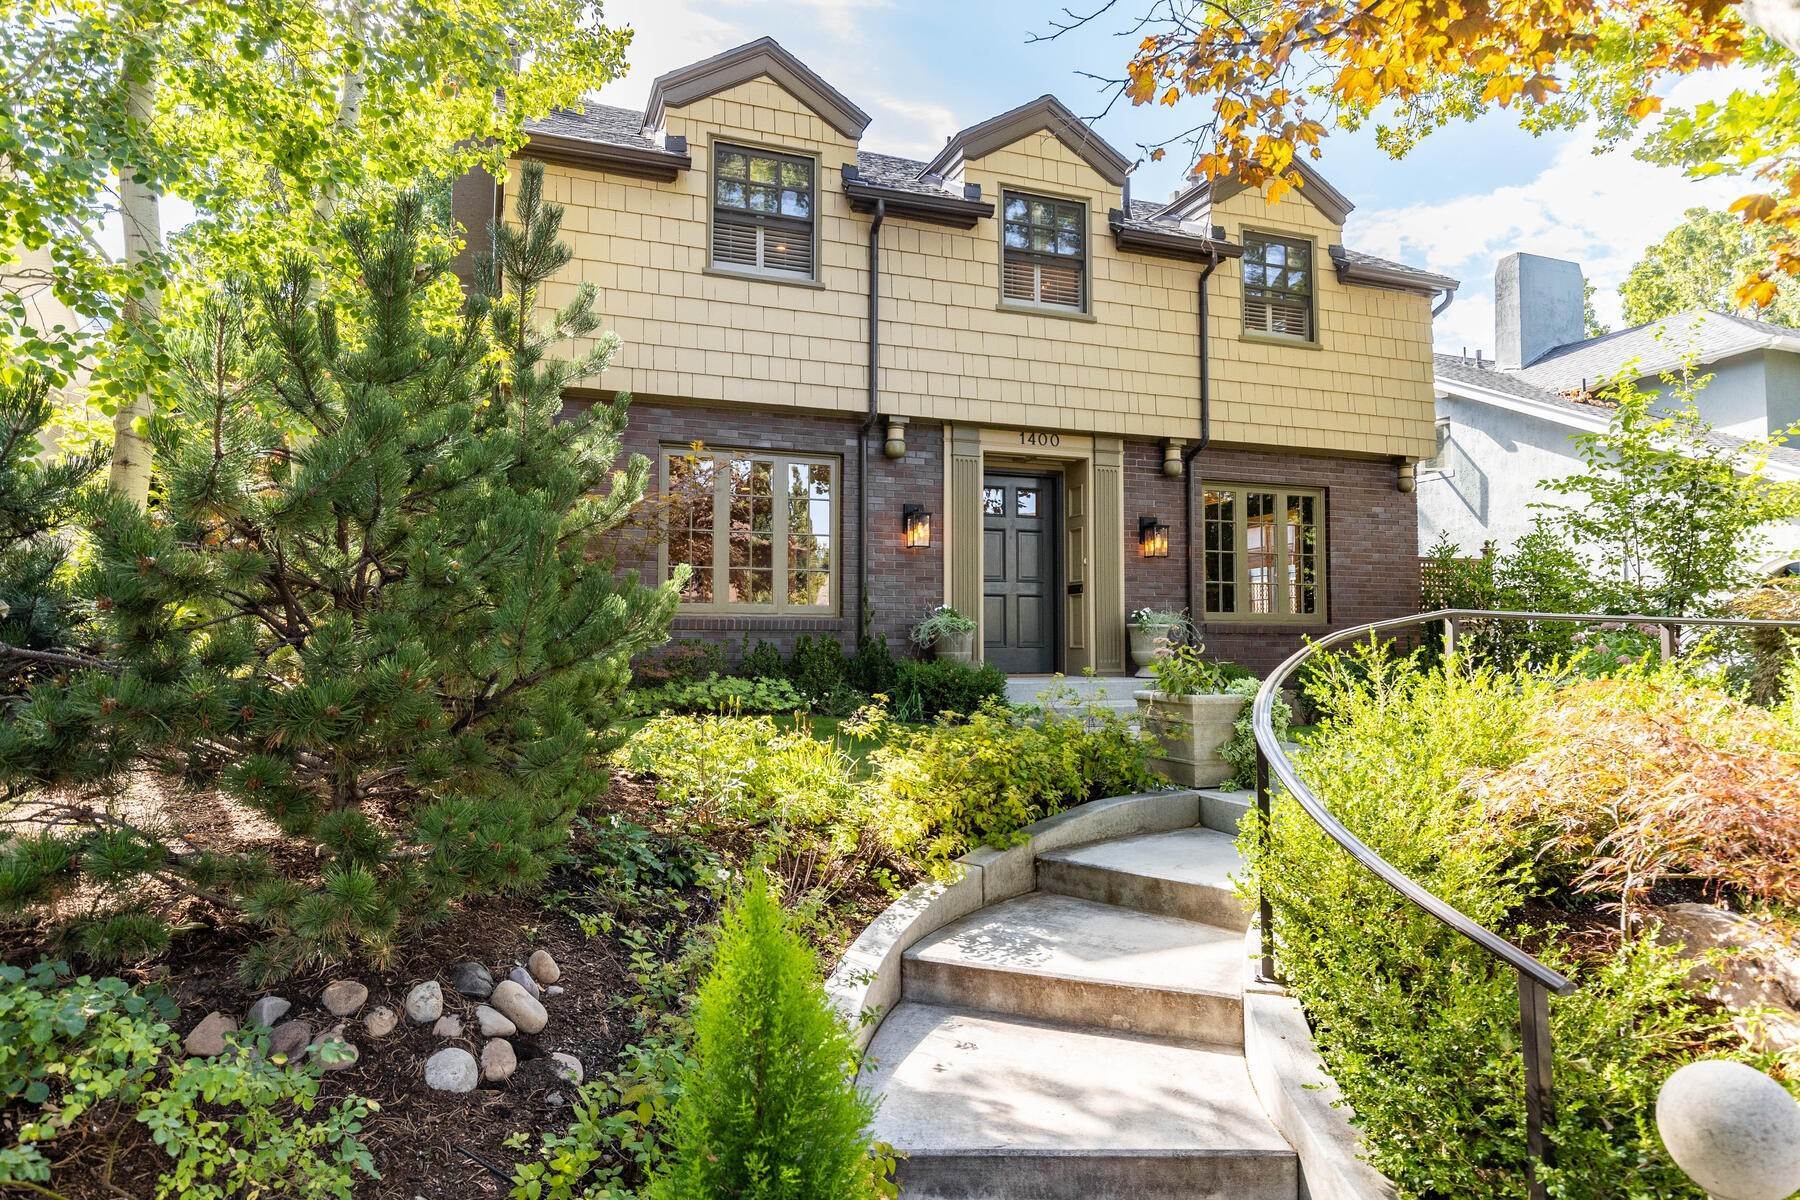 Single Family Homes for Sale at Charming home in the heart of Old Federal Heights 1400 E Perry Ave Salt Lake City, Utah 84103 United States